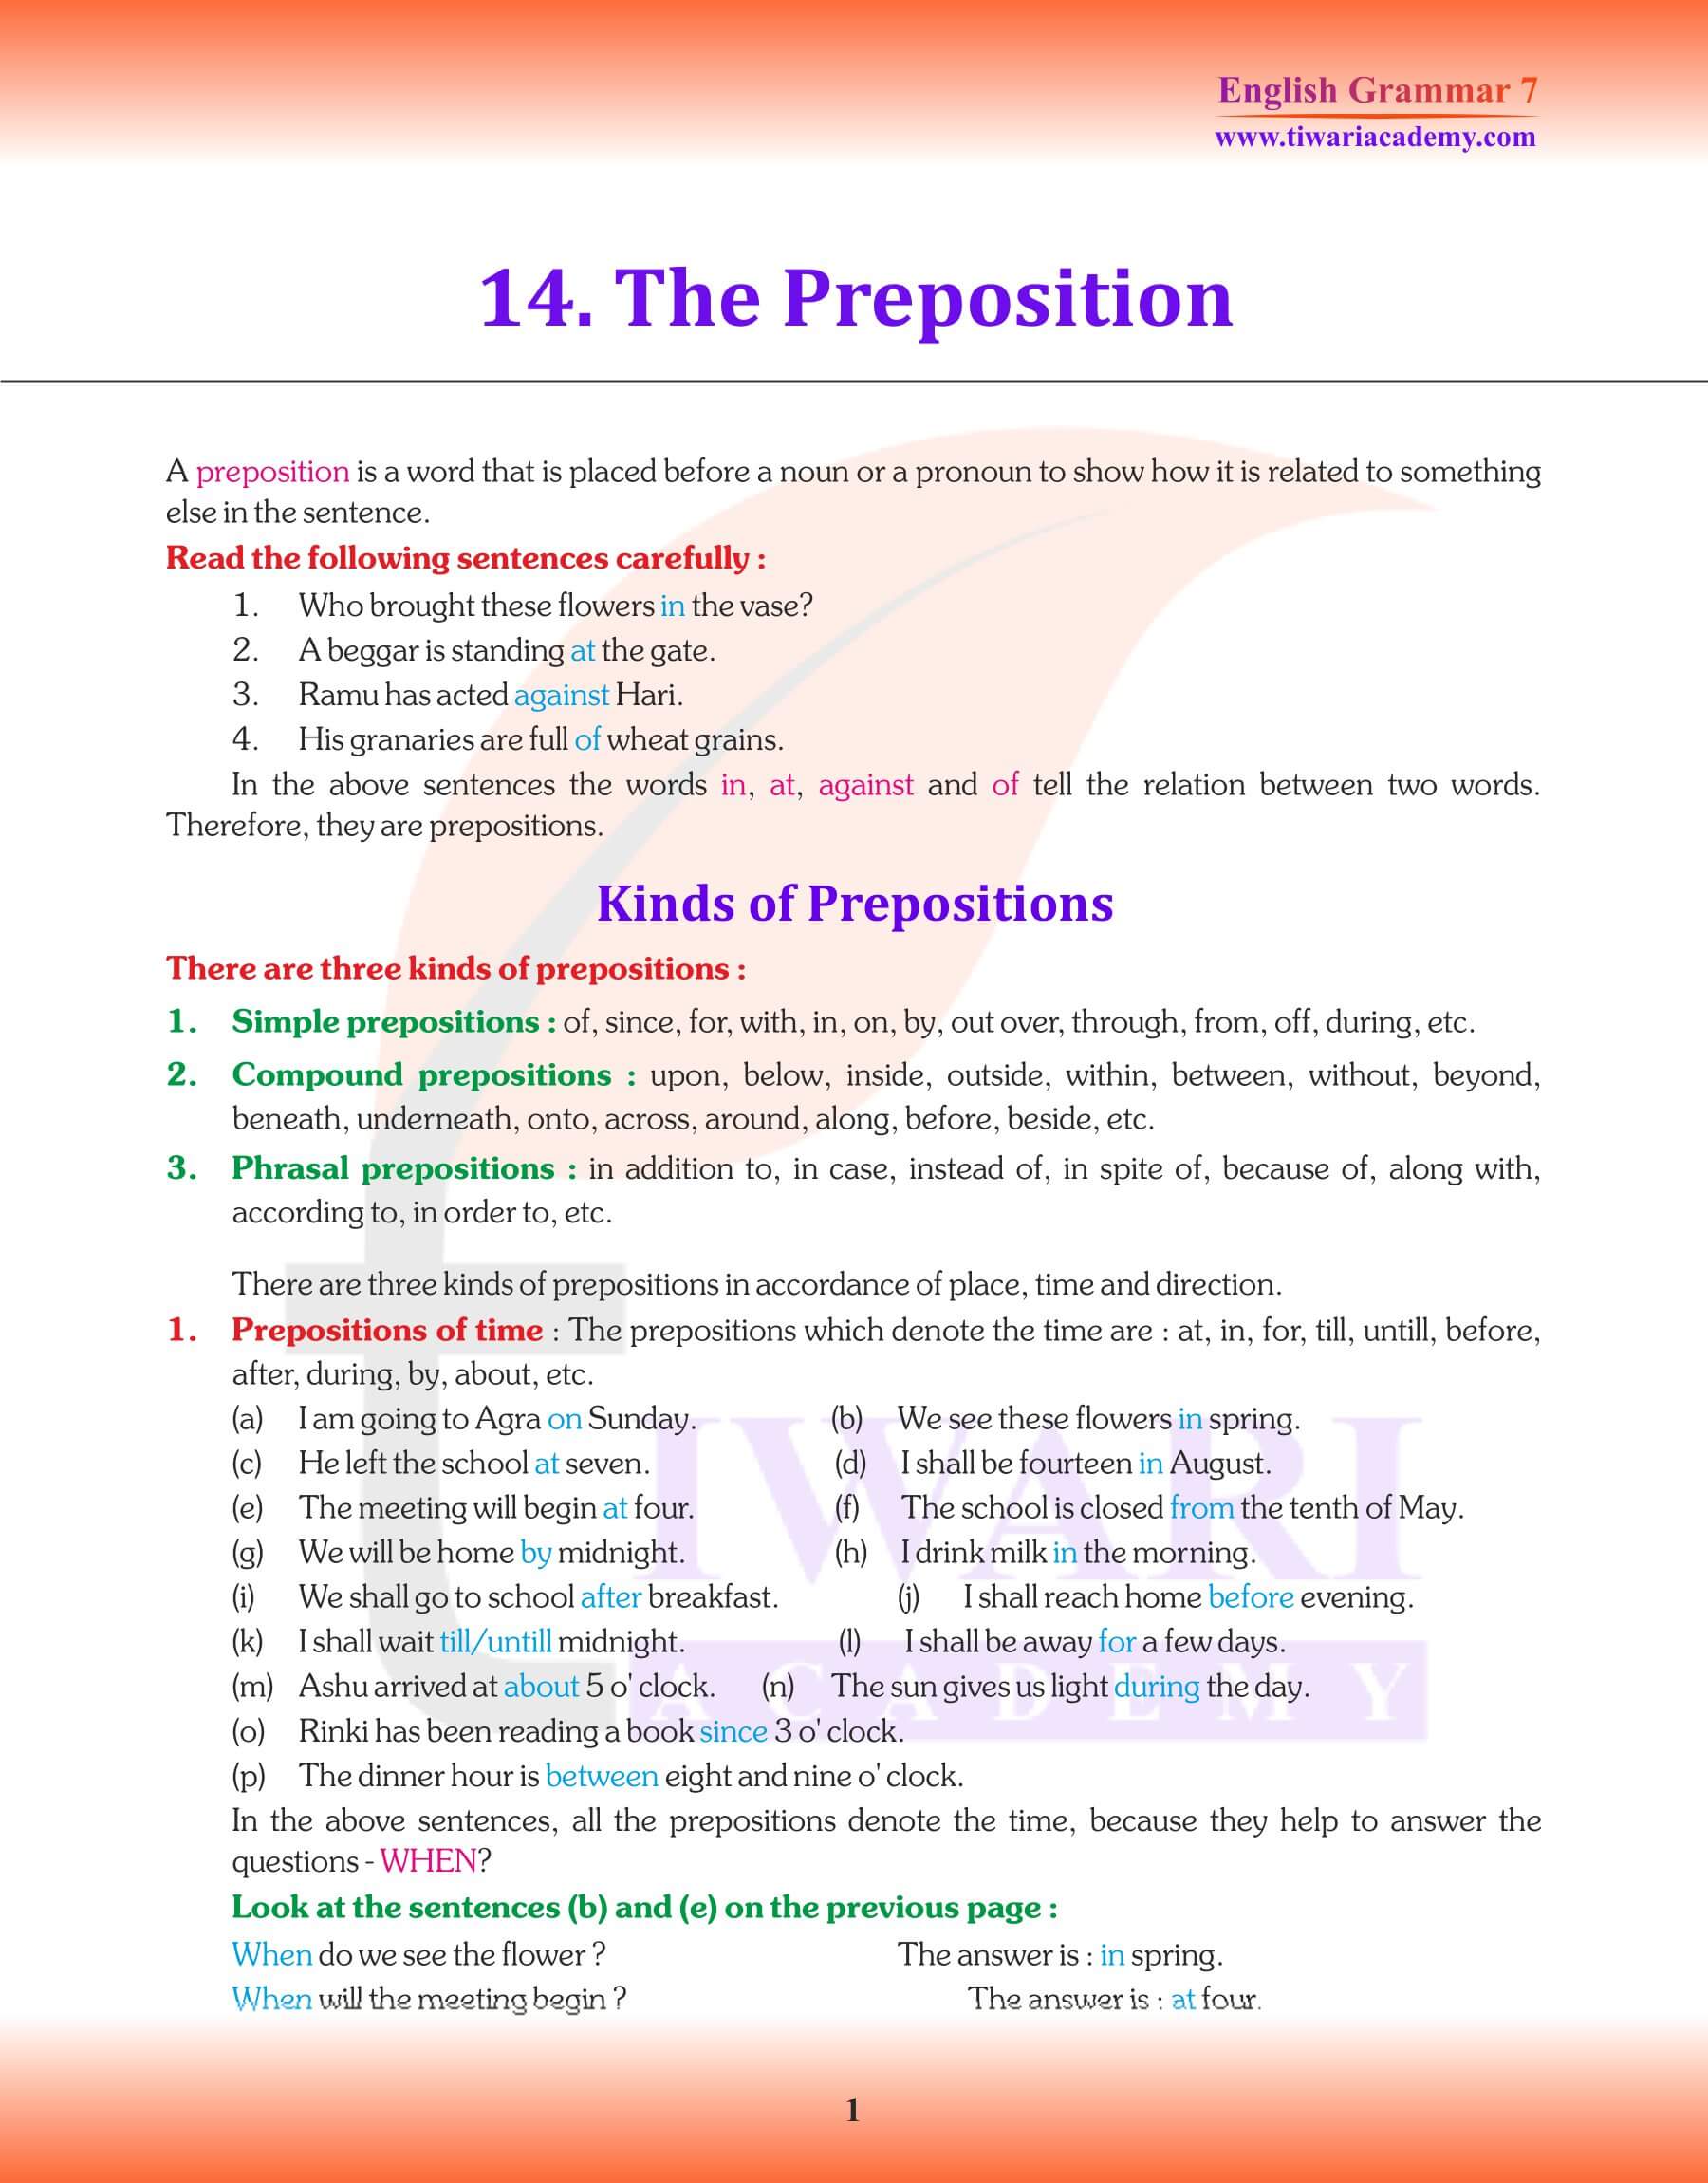 Class 7 English Grammar Chapter 14 Revision Book